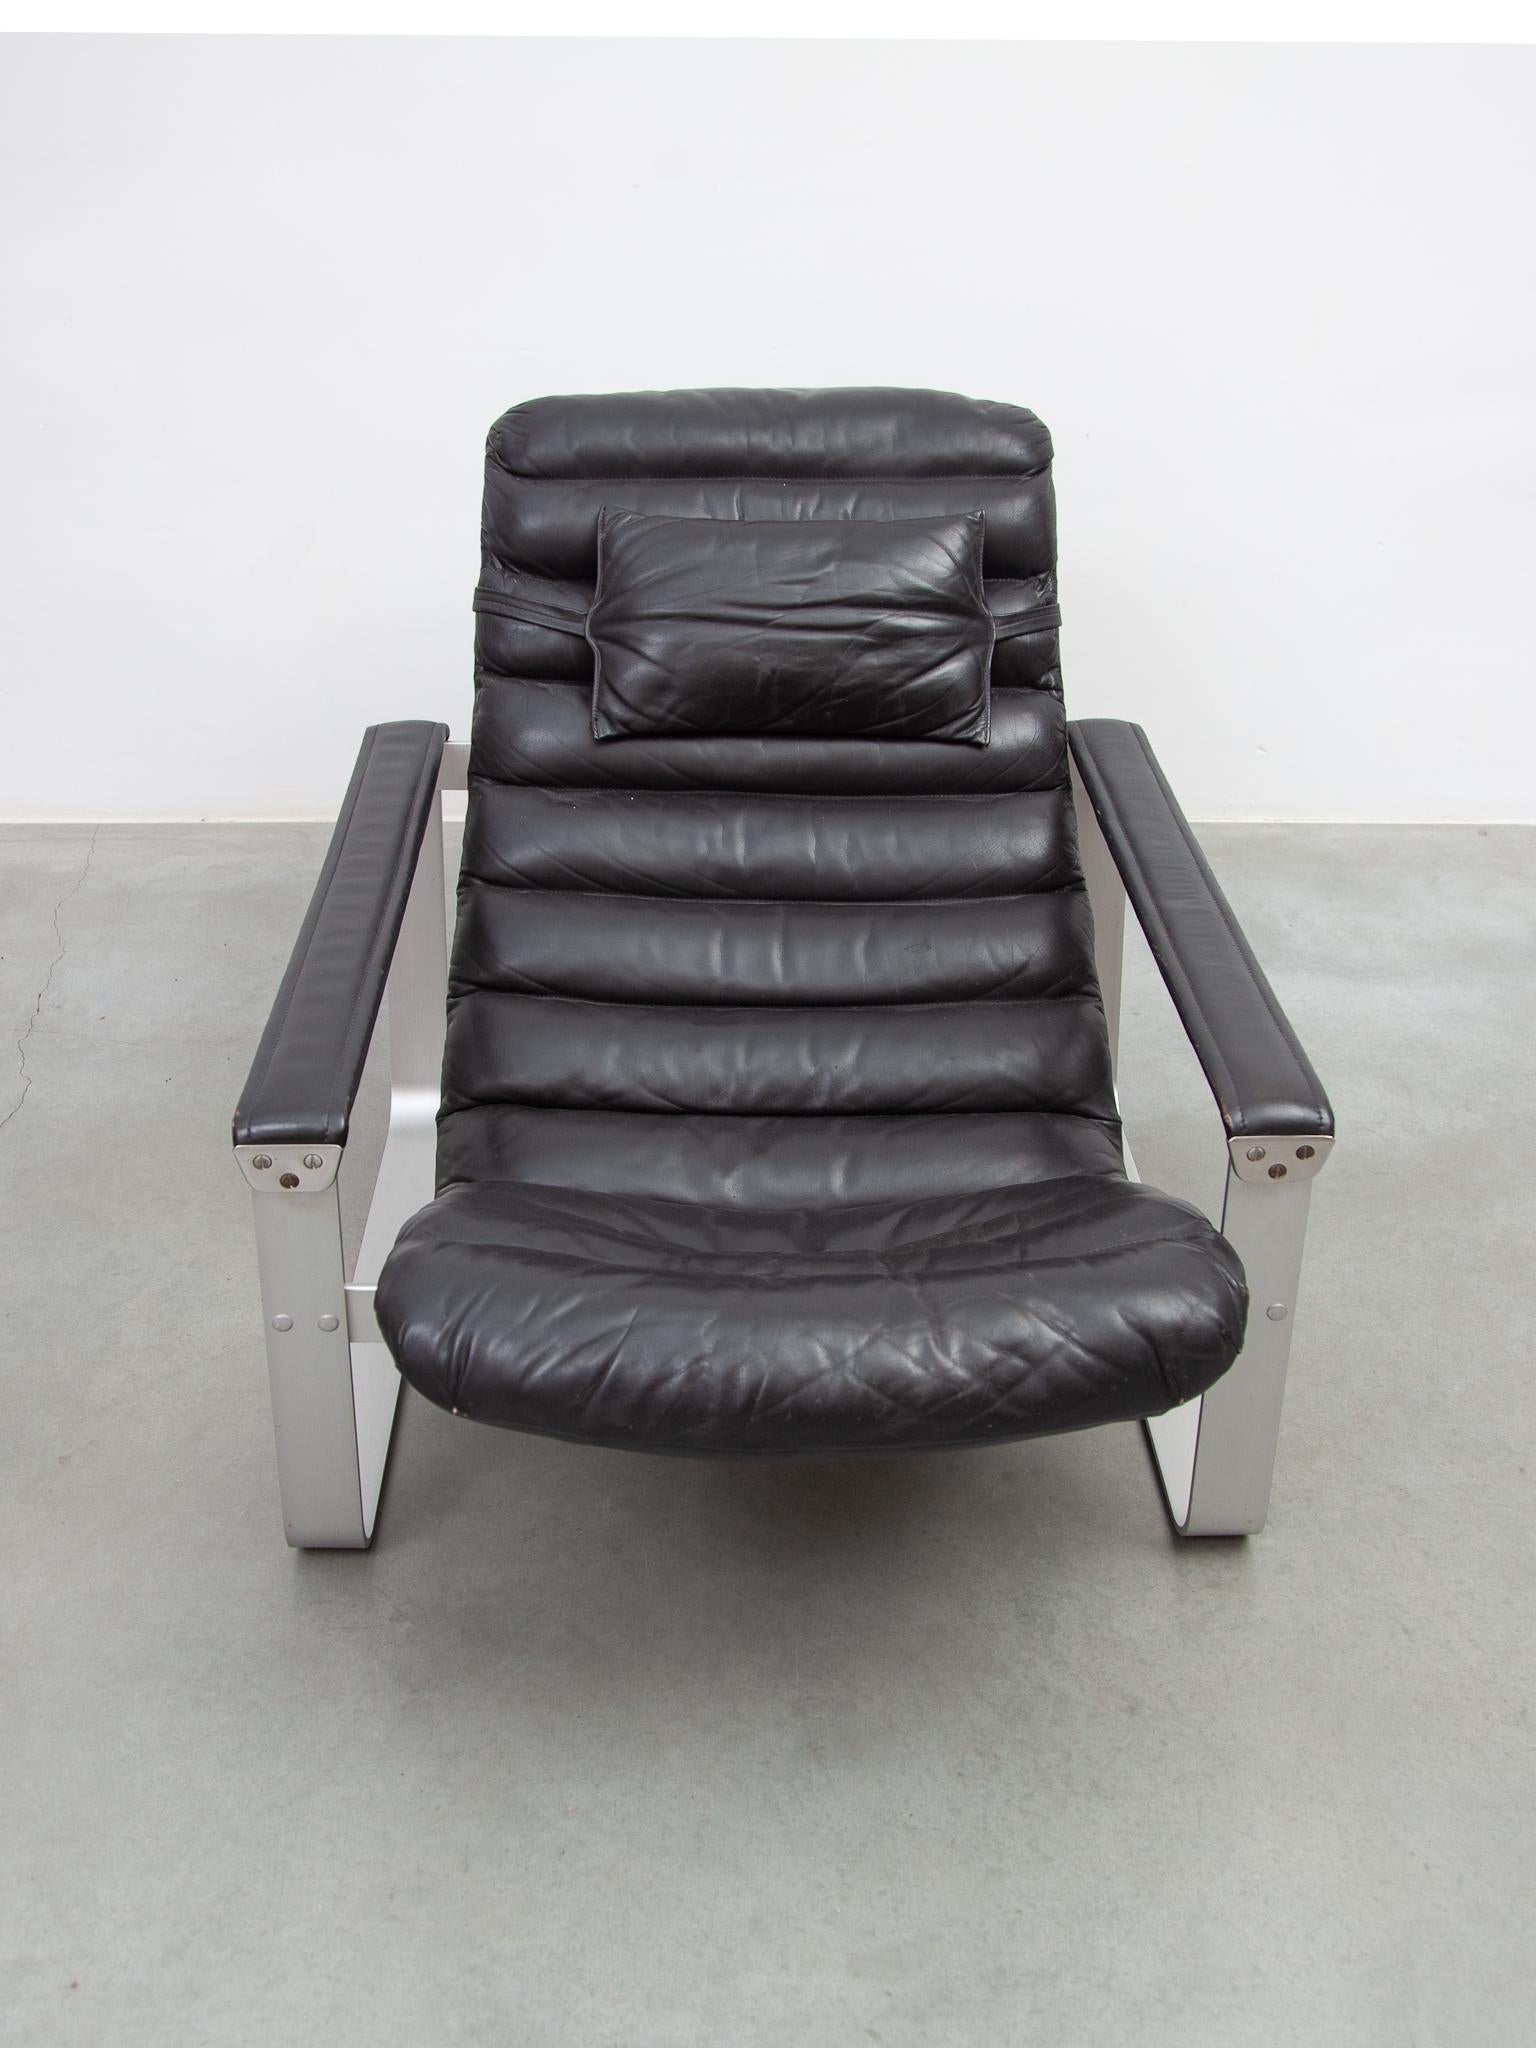 Pulkka Lounge Chair designed by Ilmari Lappalainen by ASKO, Finland, 1968 For Sale 1